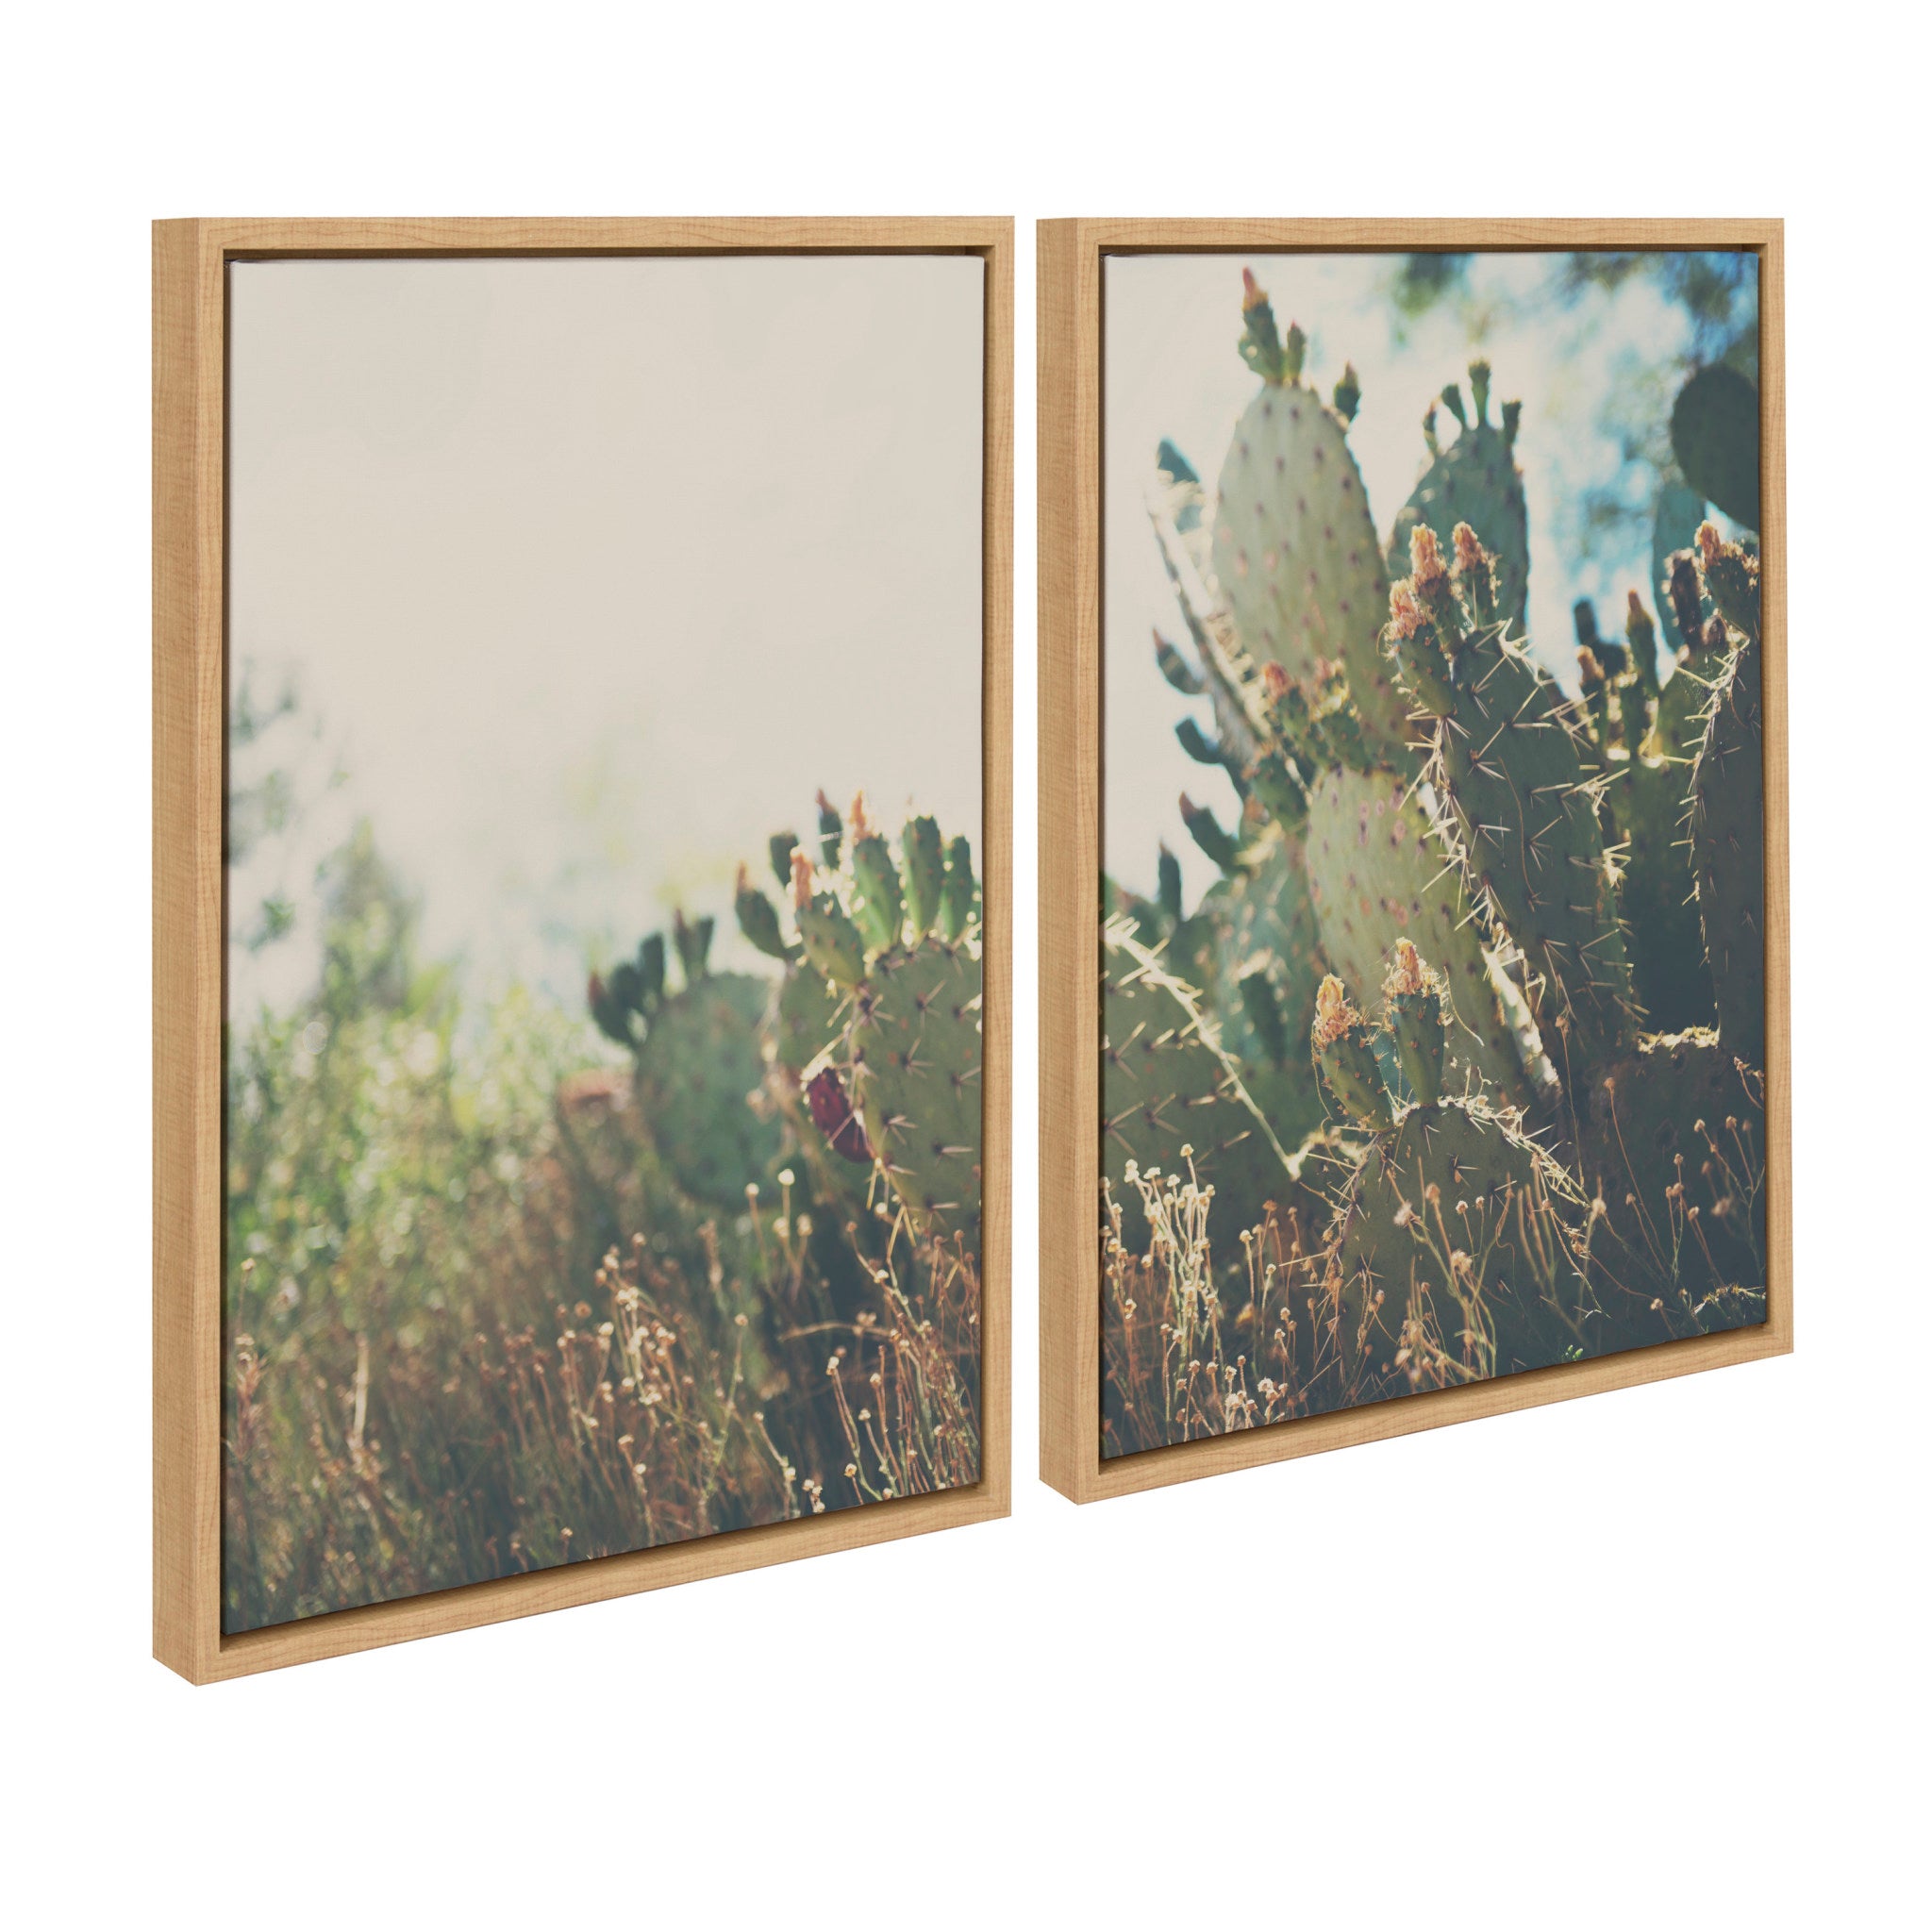 Sylvie A Desert Prickly Pear Cactus 1 and 2 Framed Canvas Art Set by Laura Evans